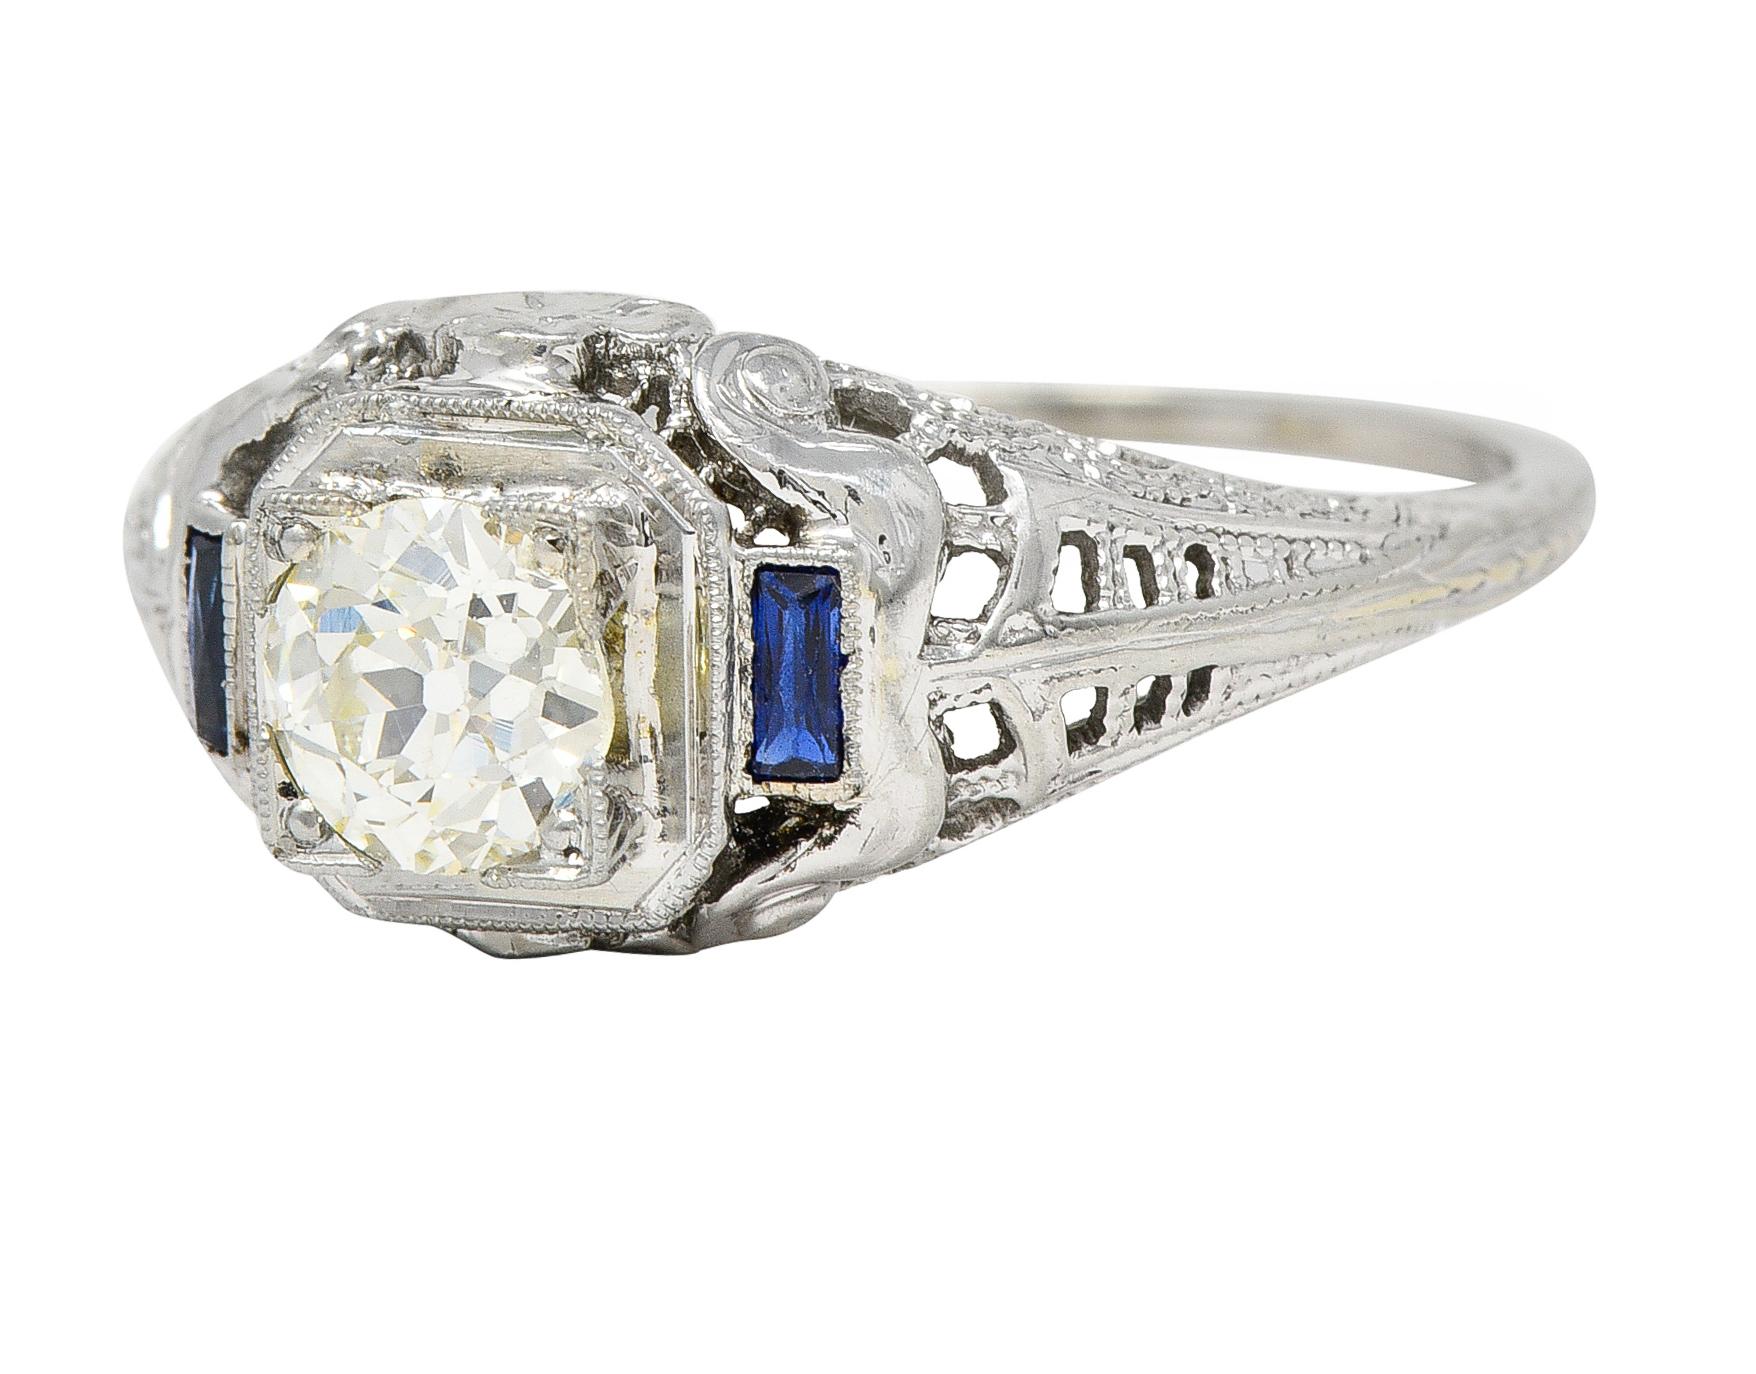 Centering an old European cut diamond weighing 0.59 carats - O/P color with VS1 clarity
Bead set in a square form head and flanked by French cut sapphires bezel set at shoulders 
Transparent medium blue in color and weighing approximately 0.12 carat